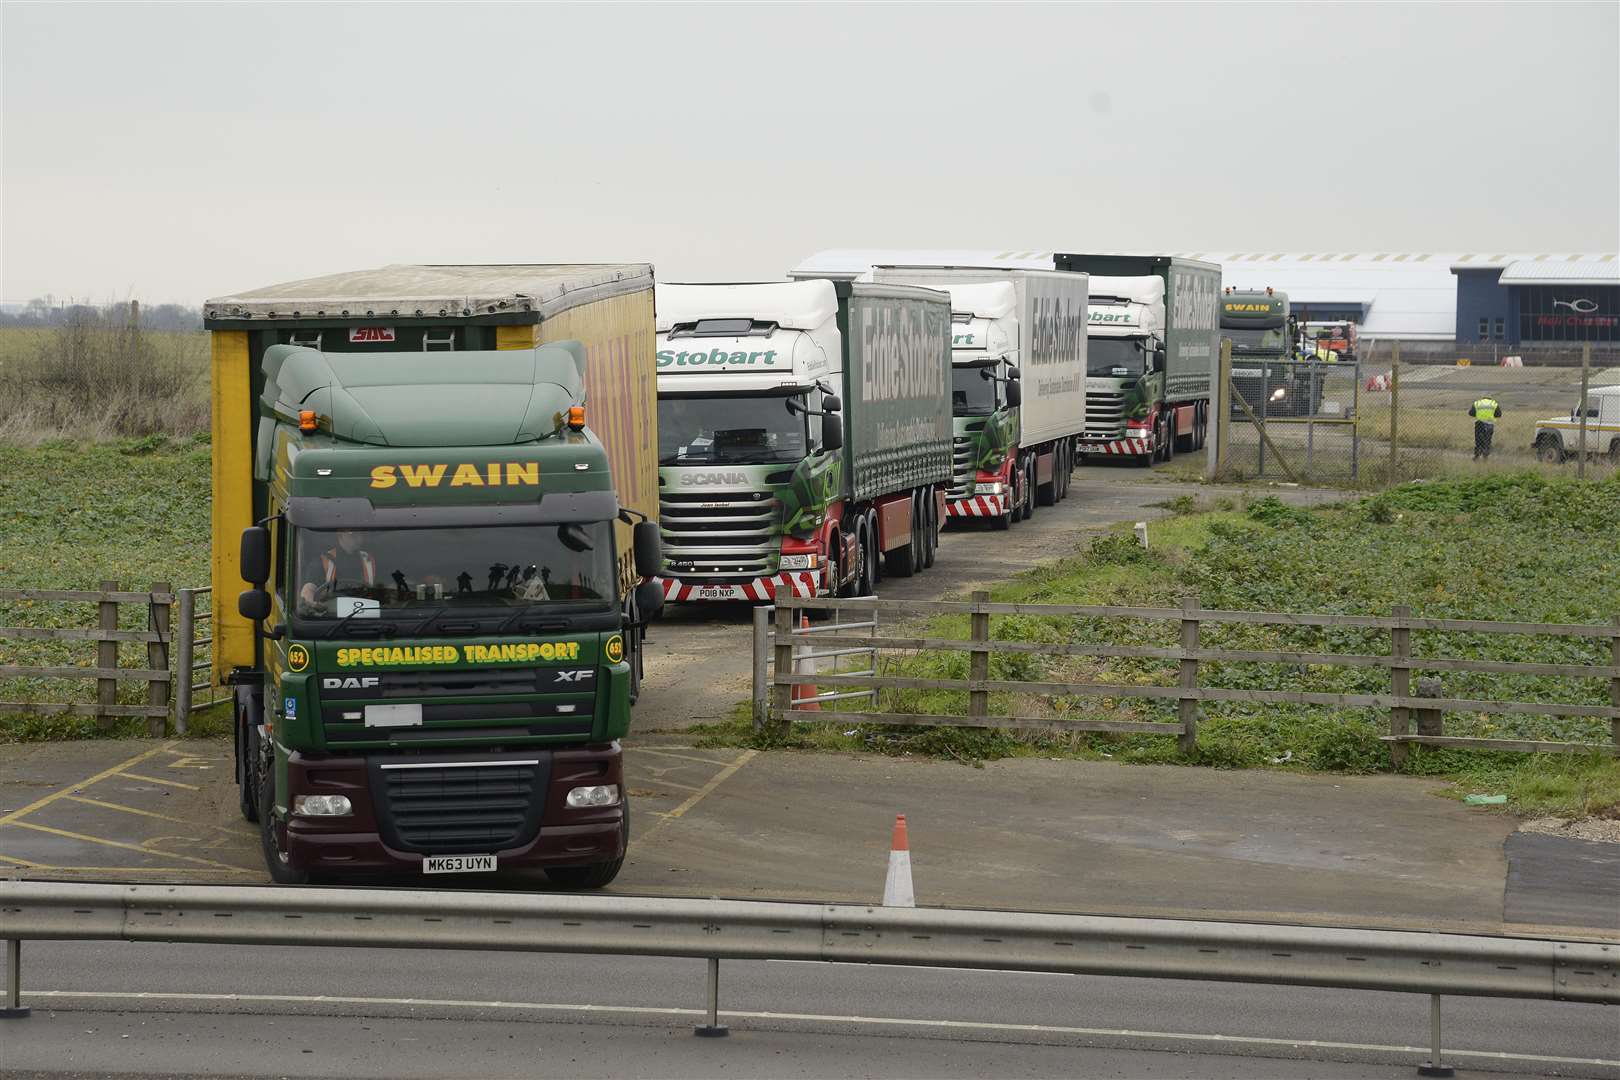 Lorries leaving Manston airport for Dover in a trial of no-deal Brexit plans earlier this month. Picture: Paul Amos